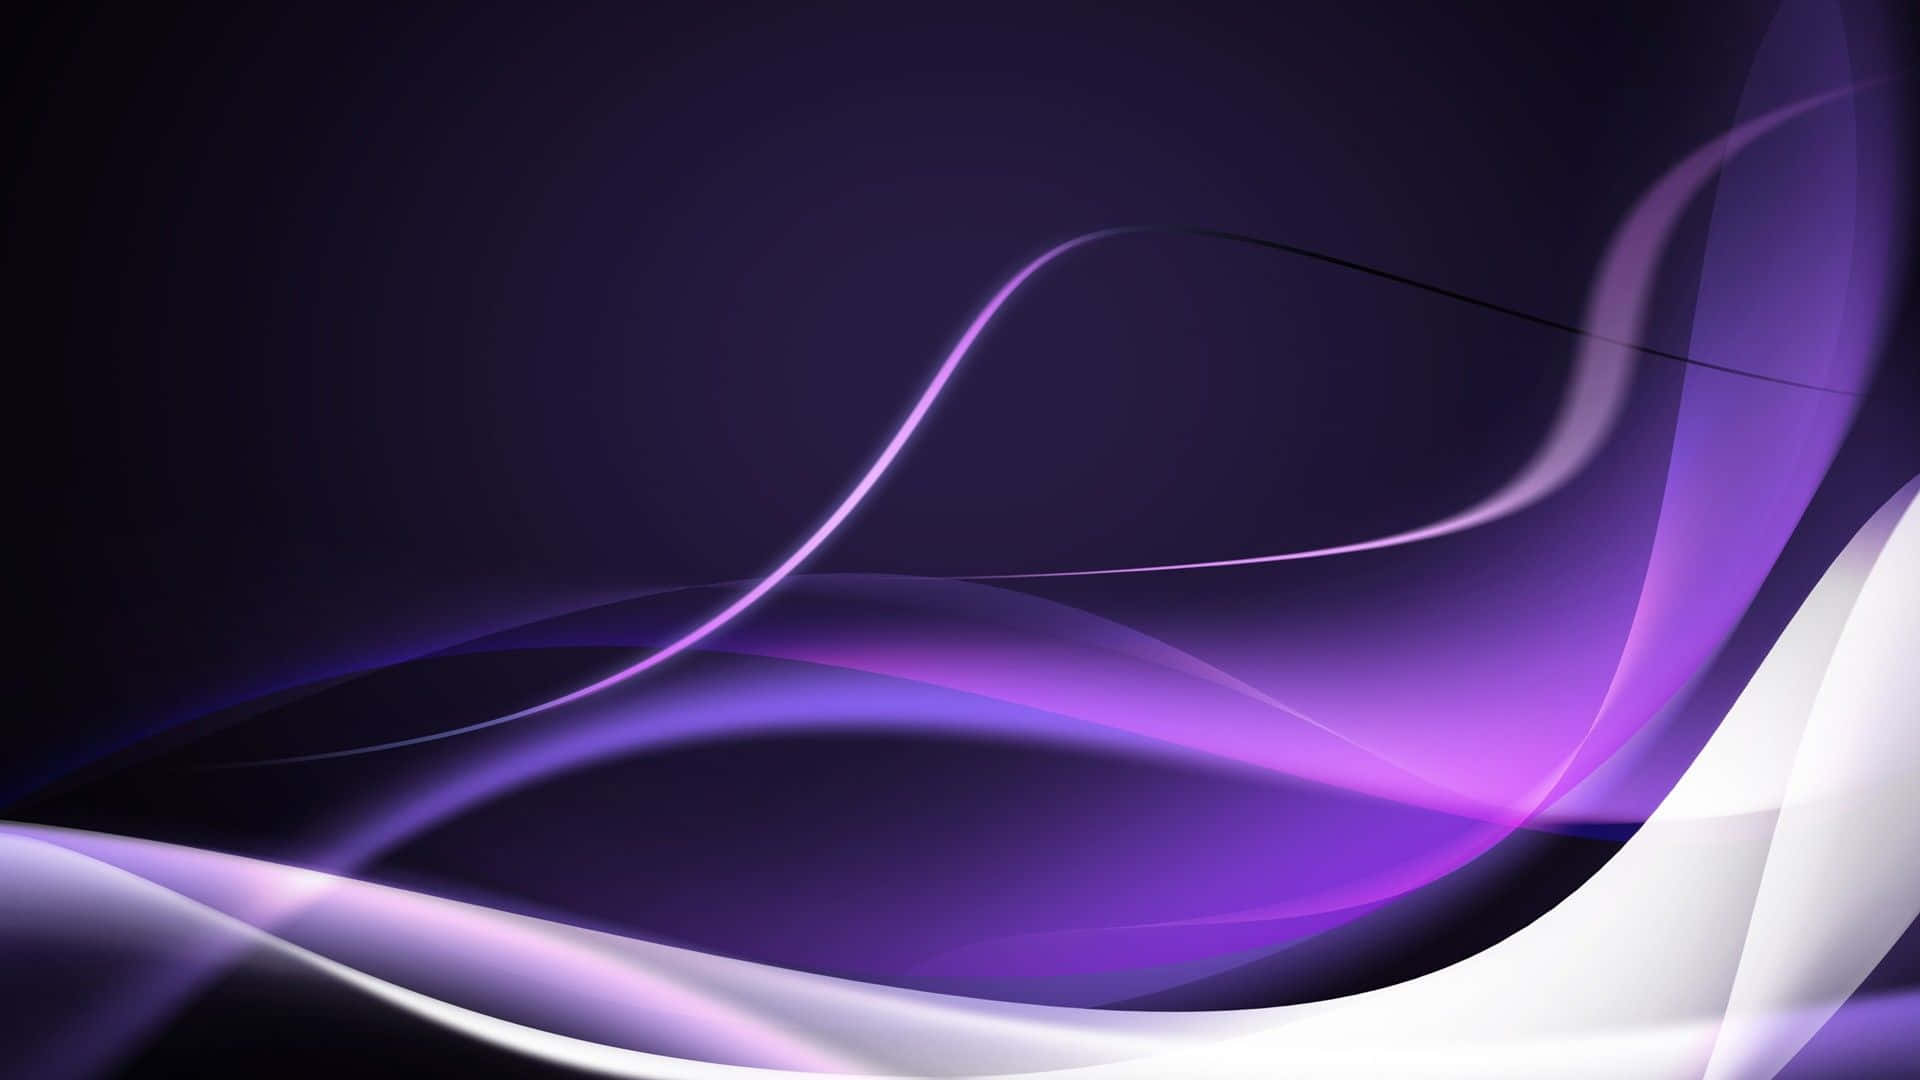 A Colorful and Mysterious View of White and Purple Wallpaper